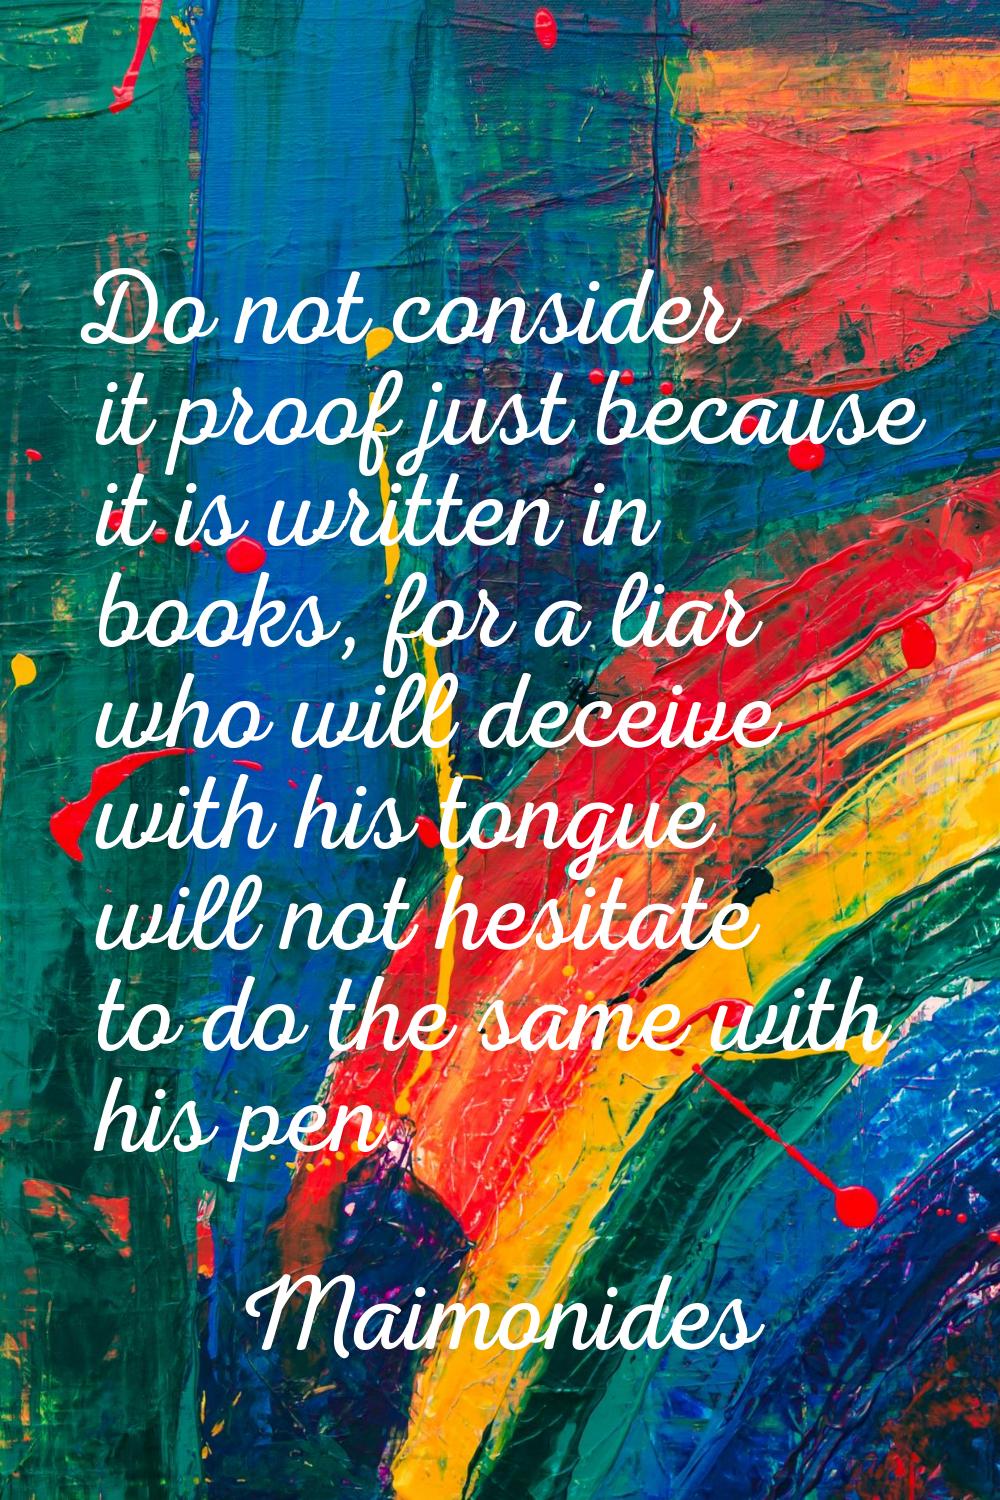 Do not consider it proof just because it is written in books, for a liar who will deceive with his 